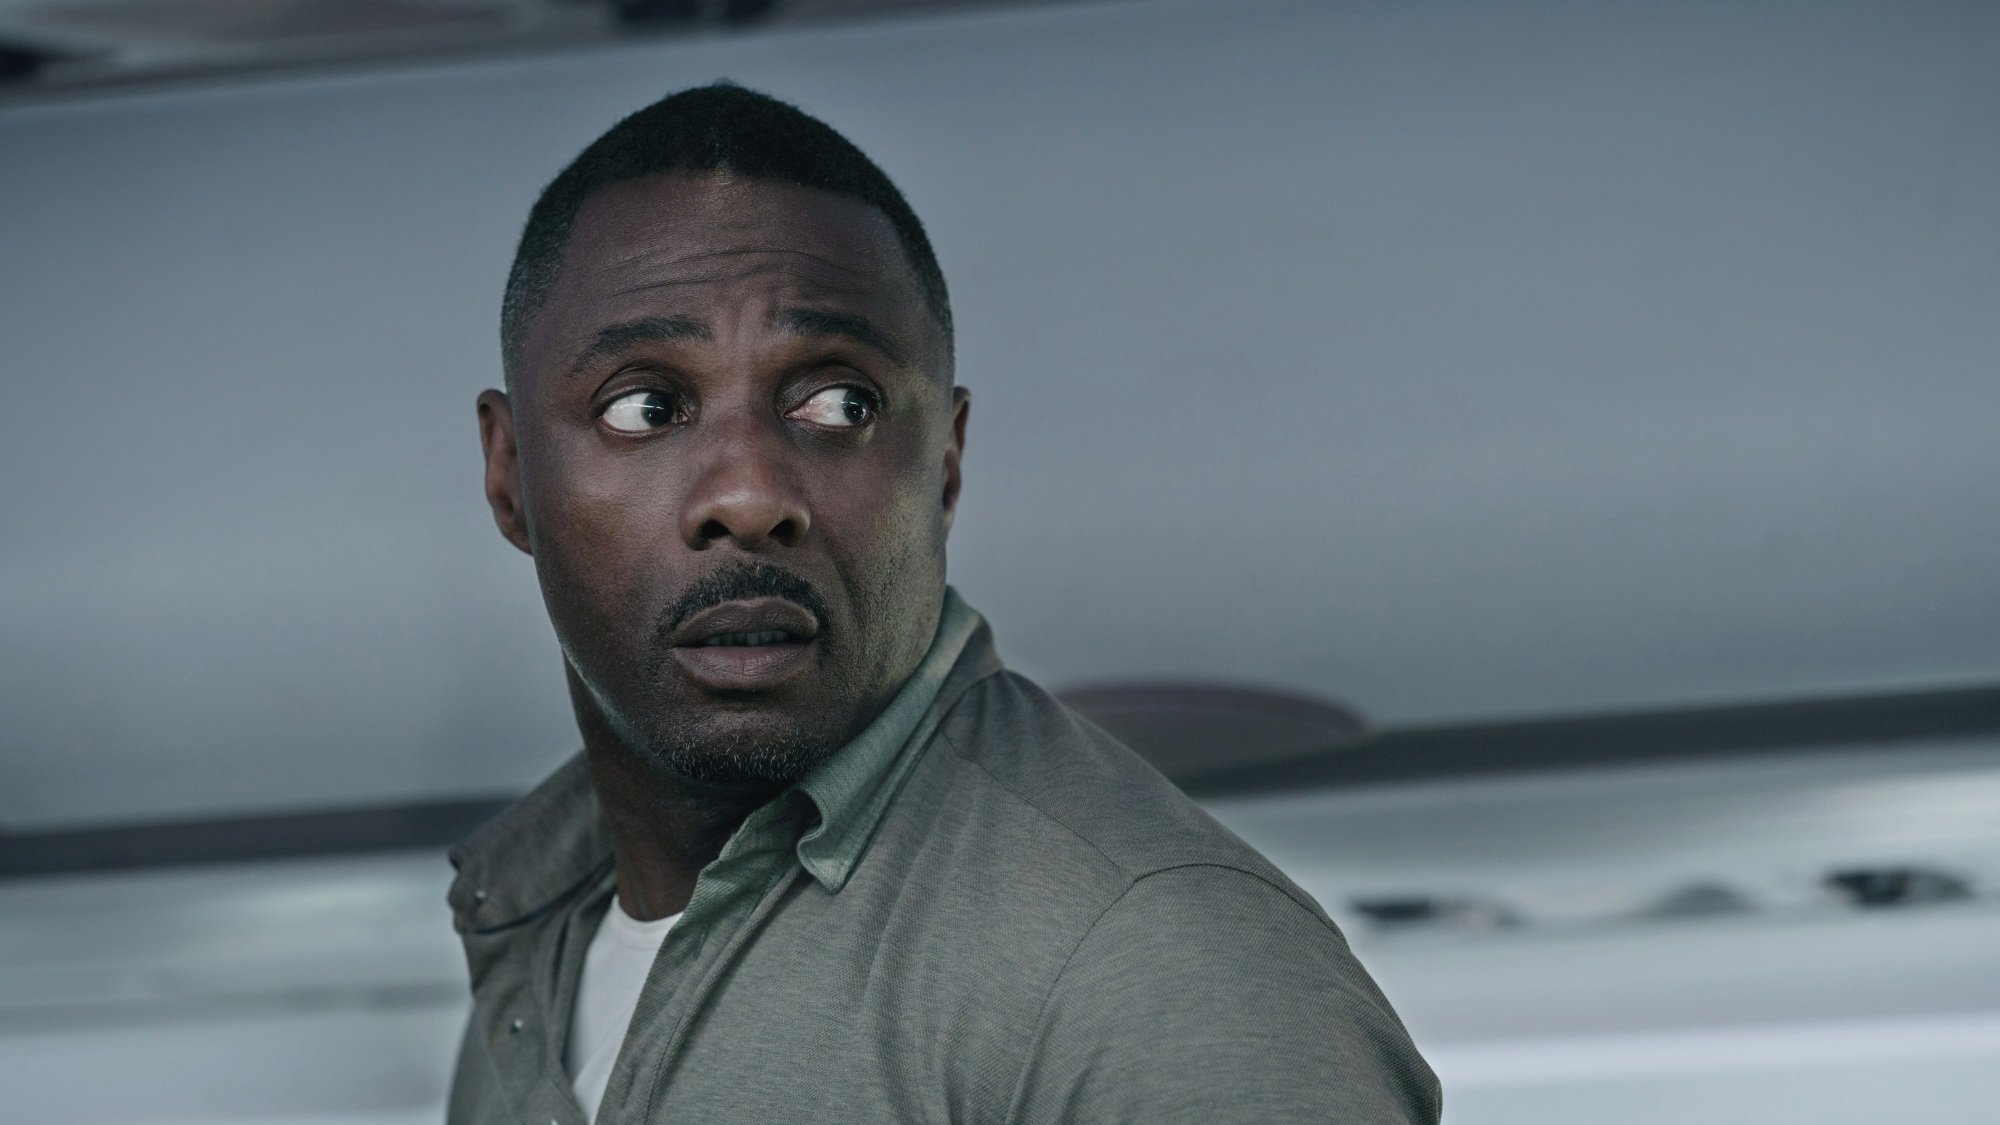 A man in a green shirt turns around, worried, in the aisle of an airplane.